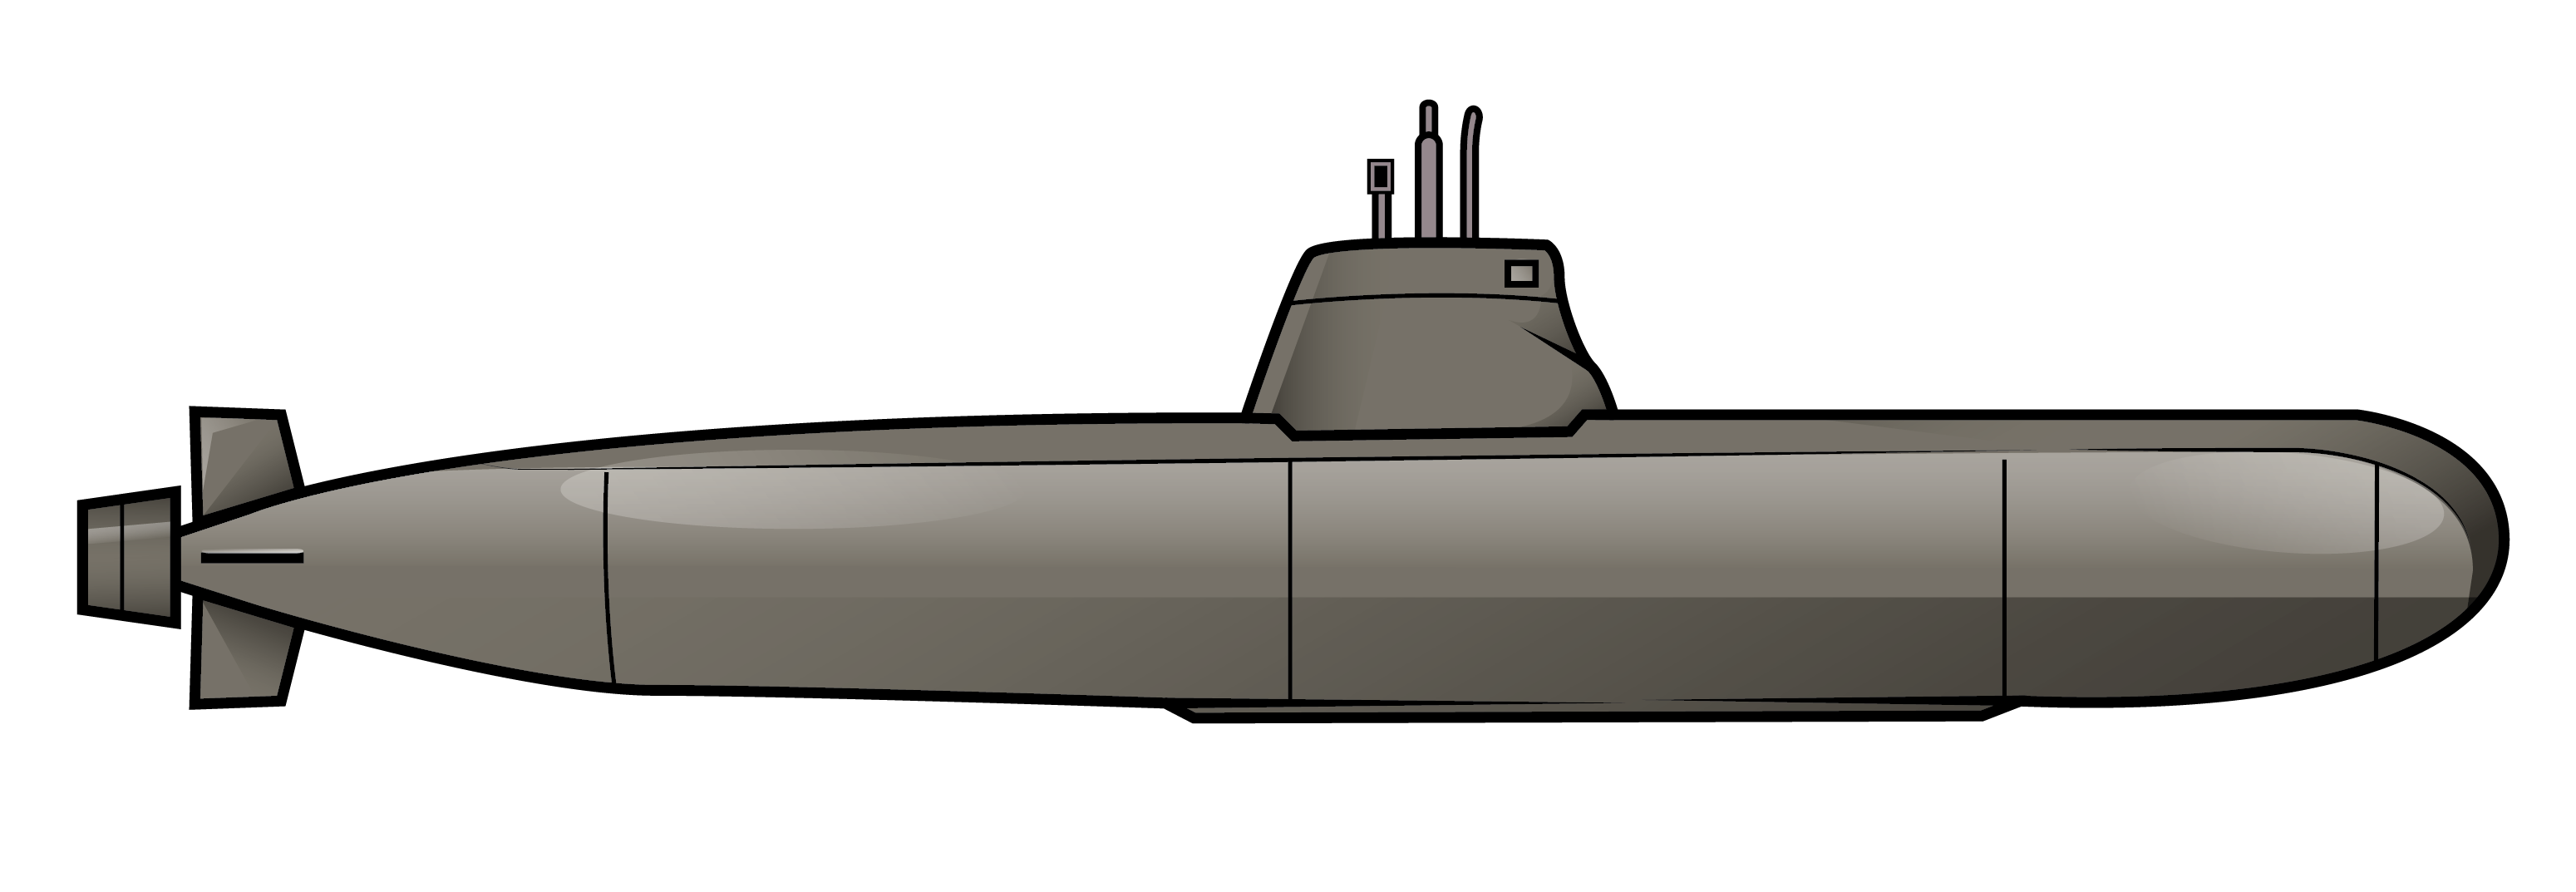 Submarine PNG HD File - Submarine Png